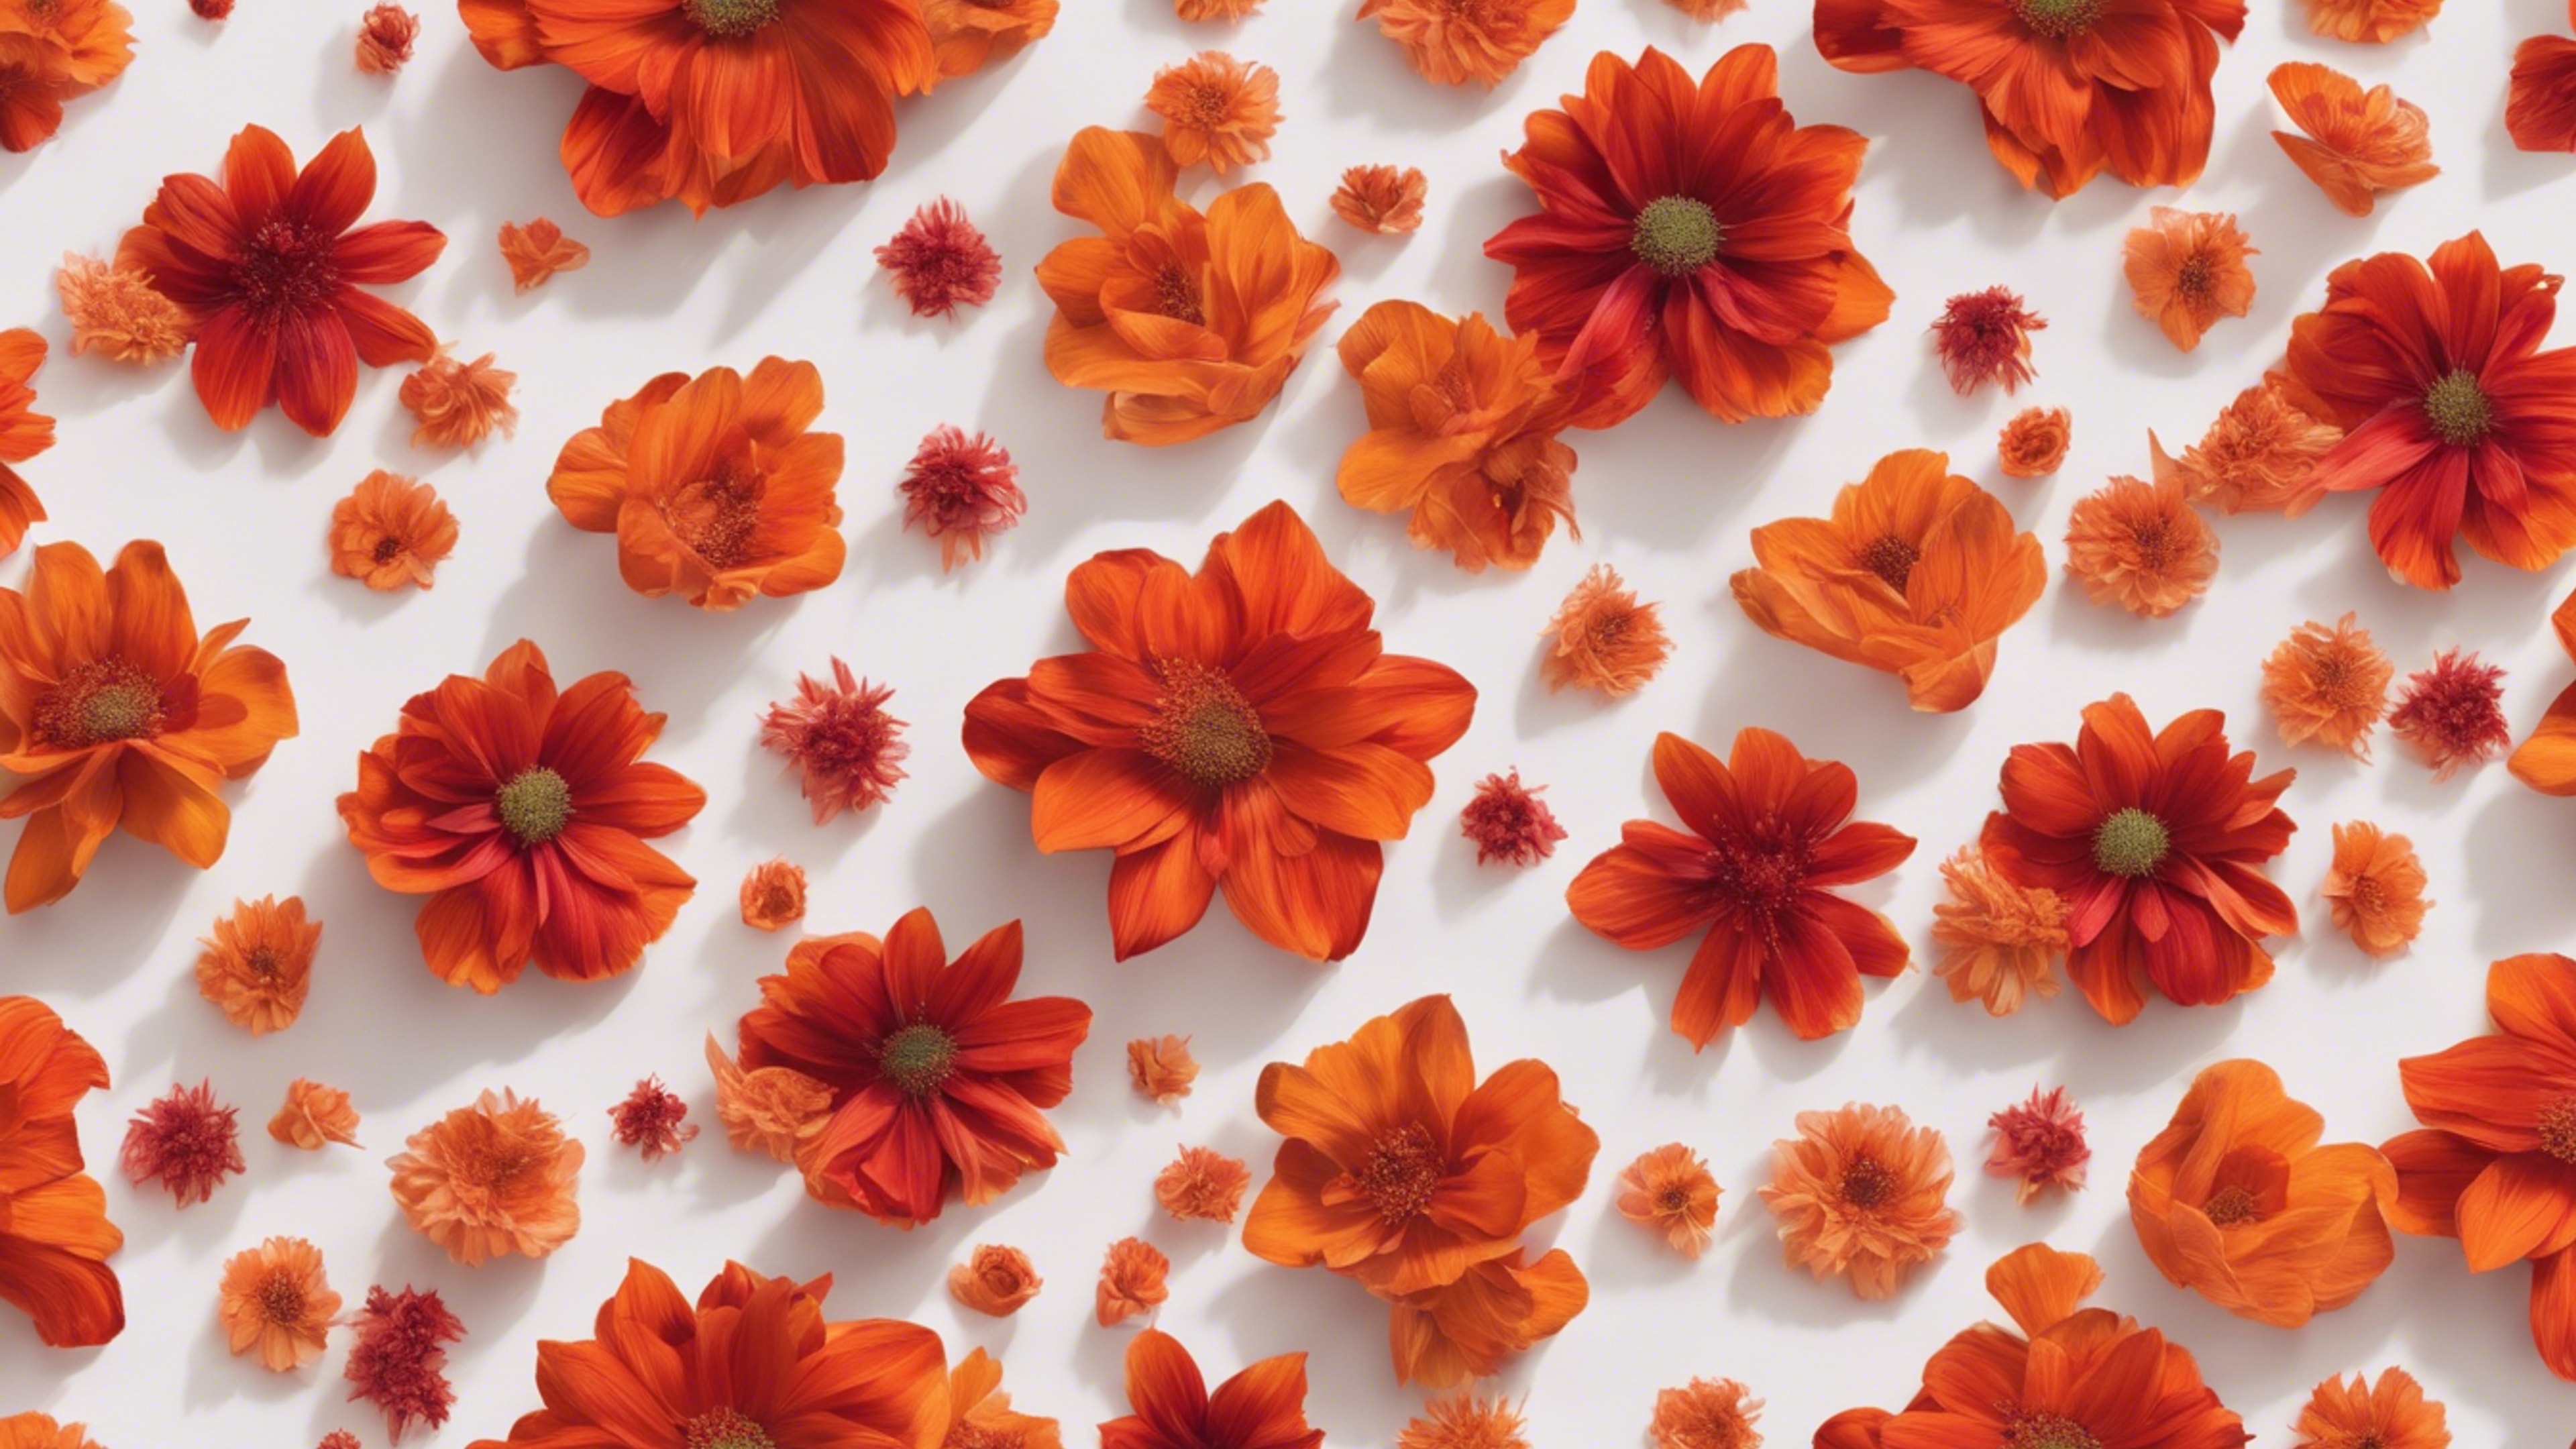 Vibrantly swirling patterns of red and orange flowers that consist of delicate petals and leaves in a seamless layout. Wallpaper[1a3317c1e5234fee8b43]